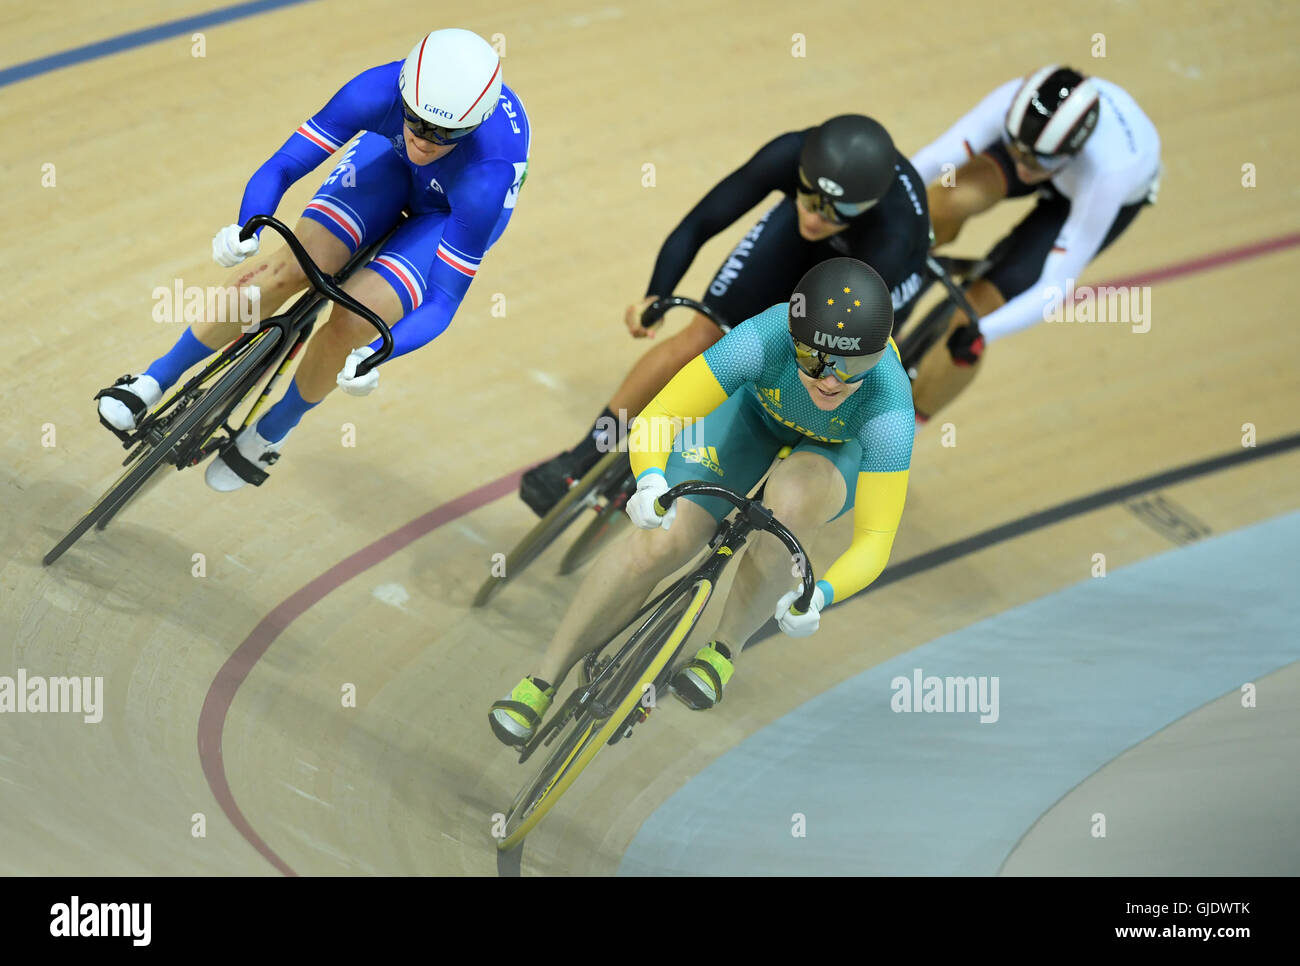 Rio de Janeiro, Brazil. 15th Aug, 2016. Anna Meares (R) of Australia and Virginie Cueff of Francein action during Women's Sprint Final (9-12) of the Rio 2016 Olympic Games Track Cycling events at Velodrome in Rio de Janeiro, Brazil, 15 August 2016. Photo: Felix Kaestle/dpa/Alamy Live News Stock Photo